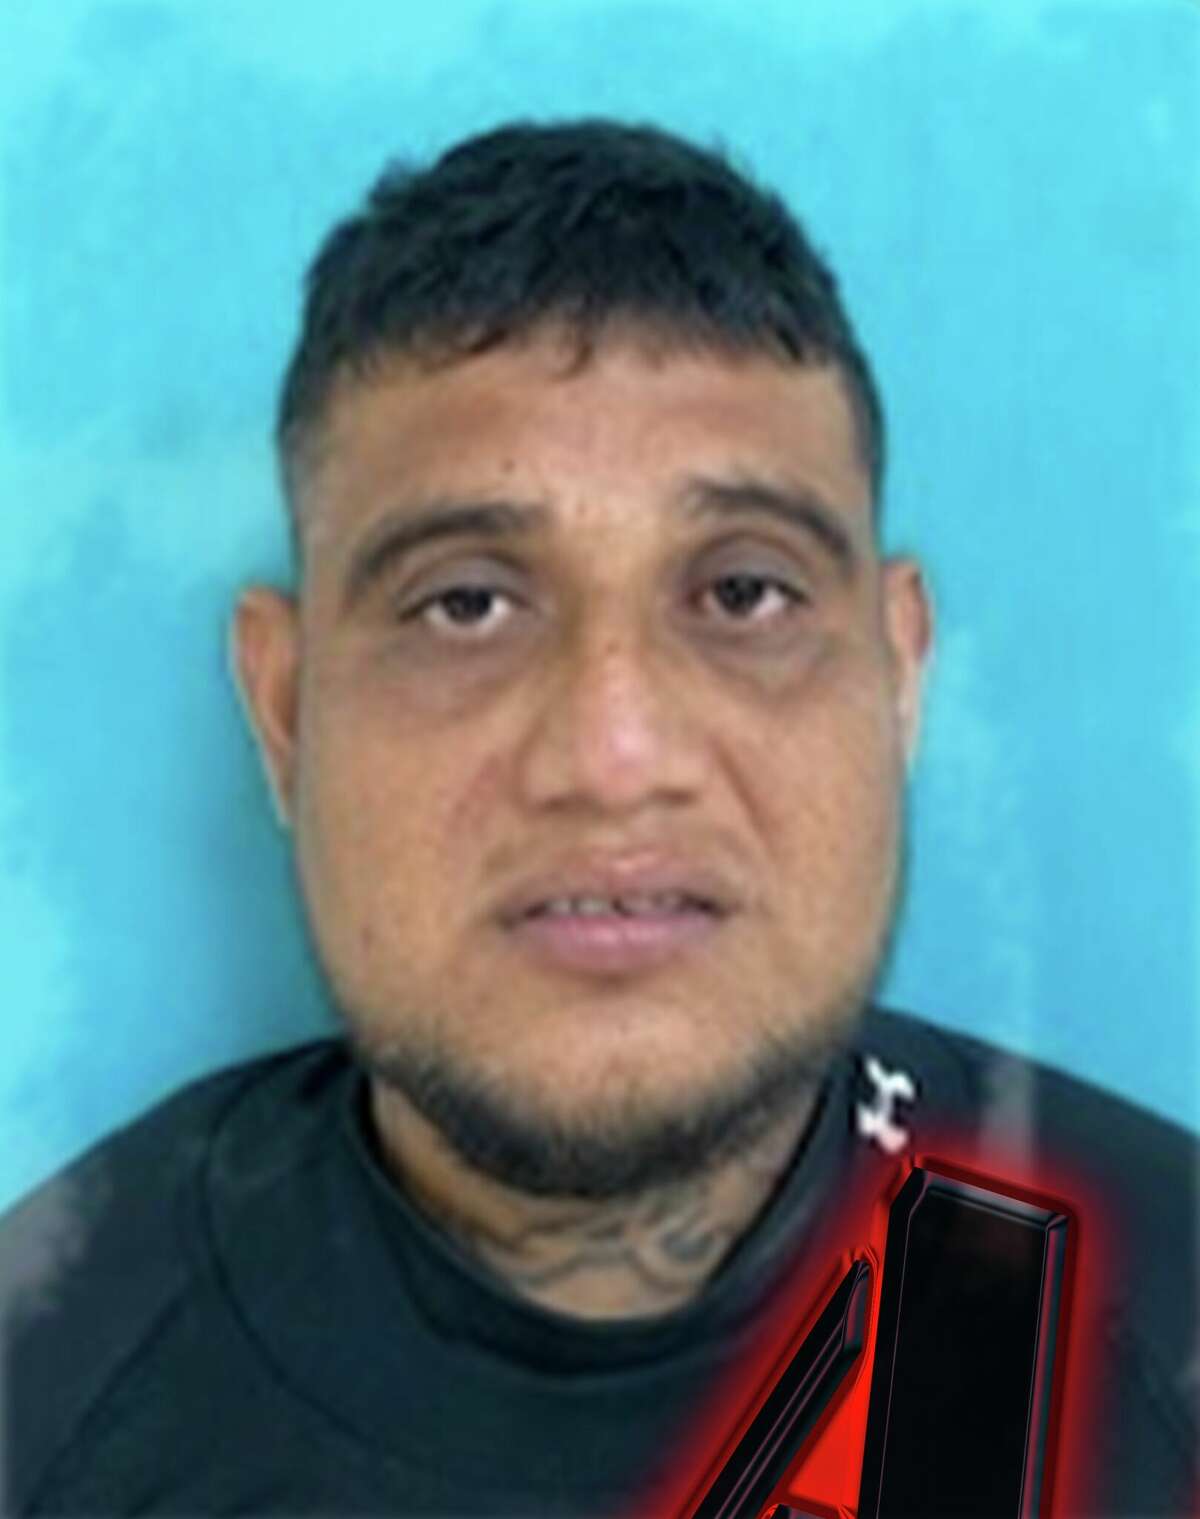 Armando Barahona-Lopez, an MS-13 gang member with a previous felony conviction for a drive-by shooting, was arrested Thursday, April 27, 2023 for trying to enter the country by Laredo Sector Border Patrol agents.